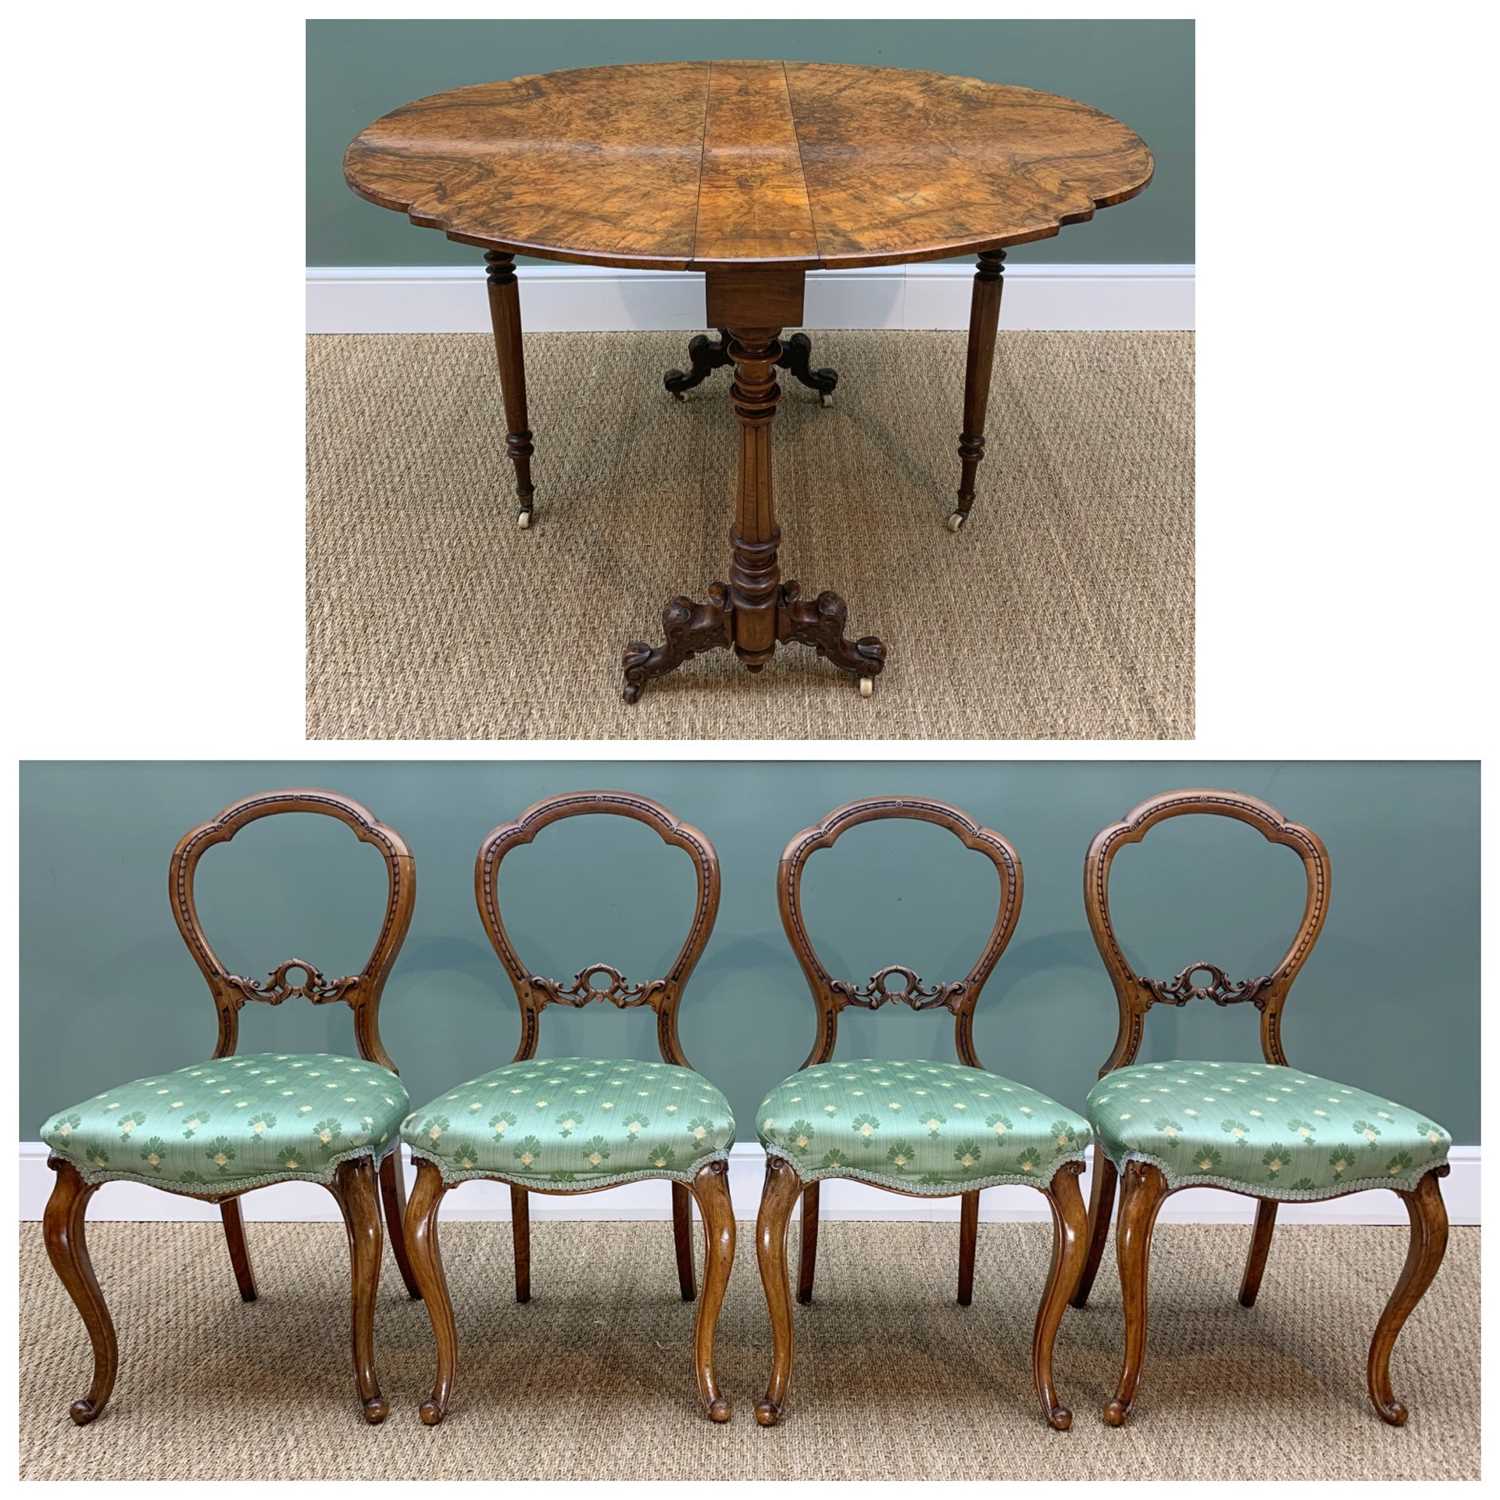 MID VICTORIAN BURR-WALNUT SUTHERLAND TABLE, shaped top over column suppports with blind fret